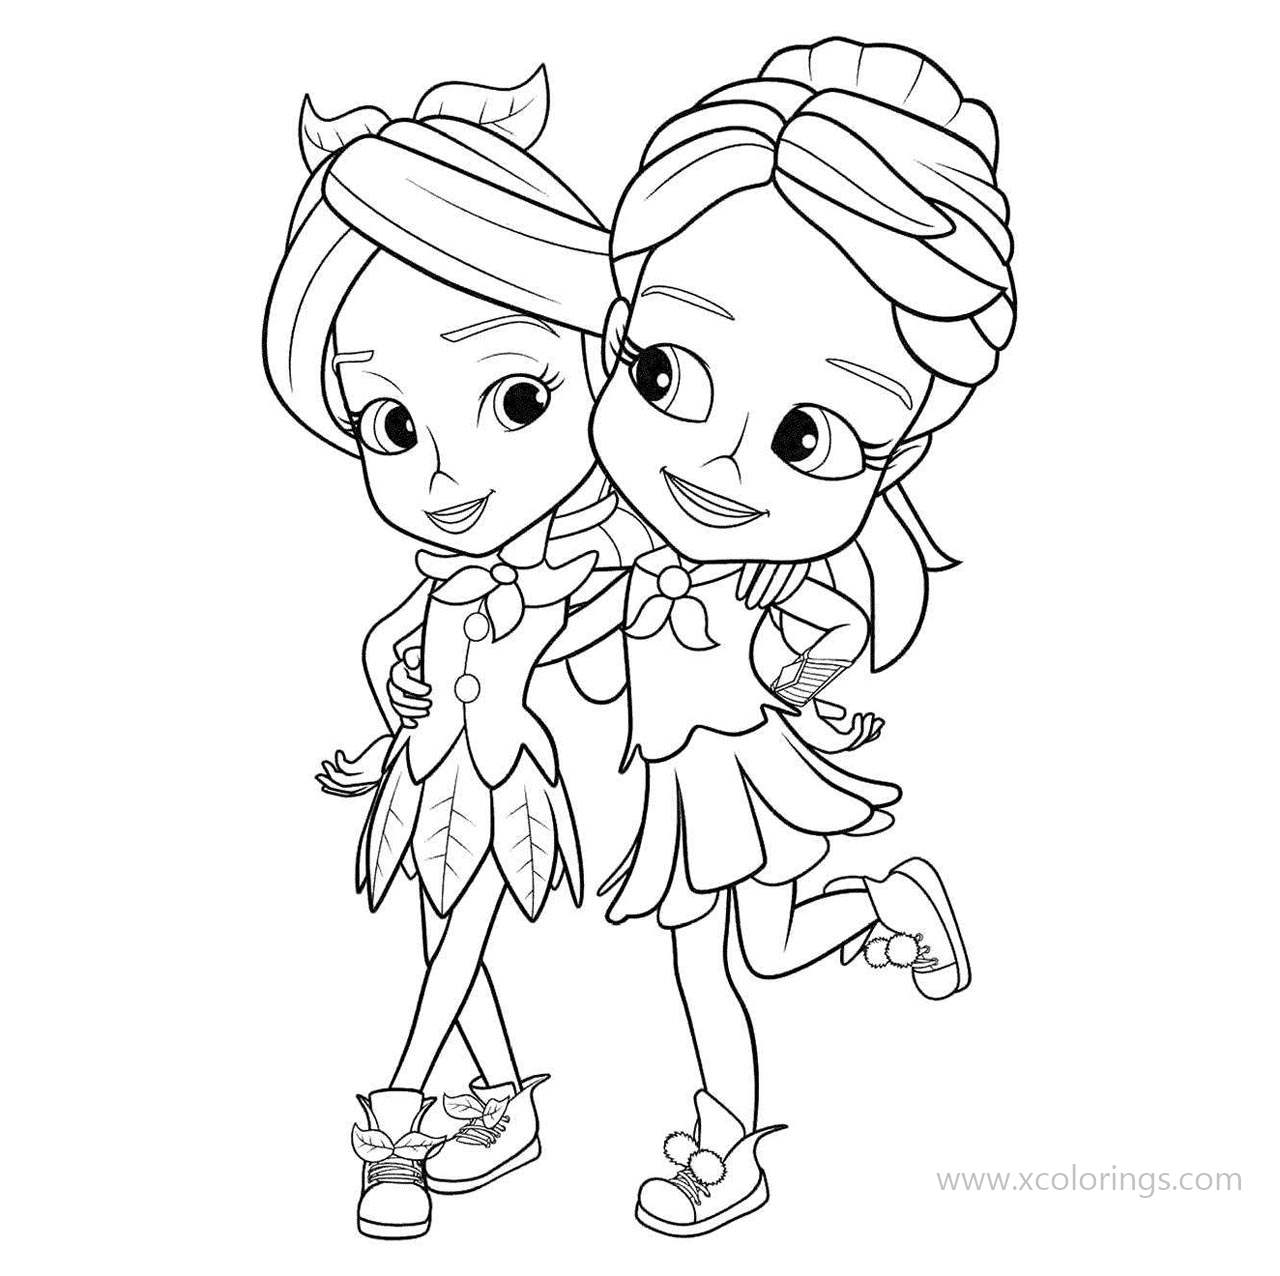 Free Rainbow Rangers Coloring Pages Pepper Mintz and Mandarin Orange printable